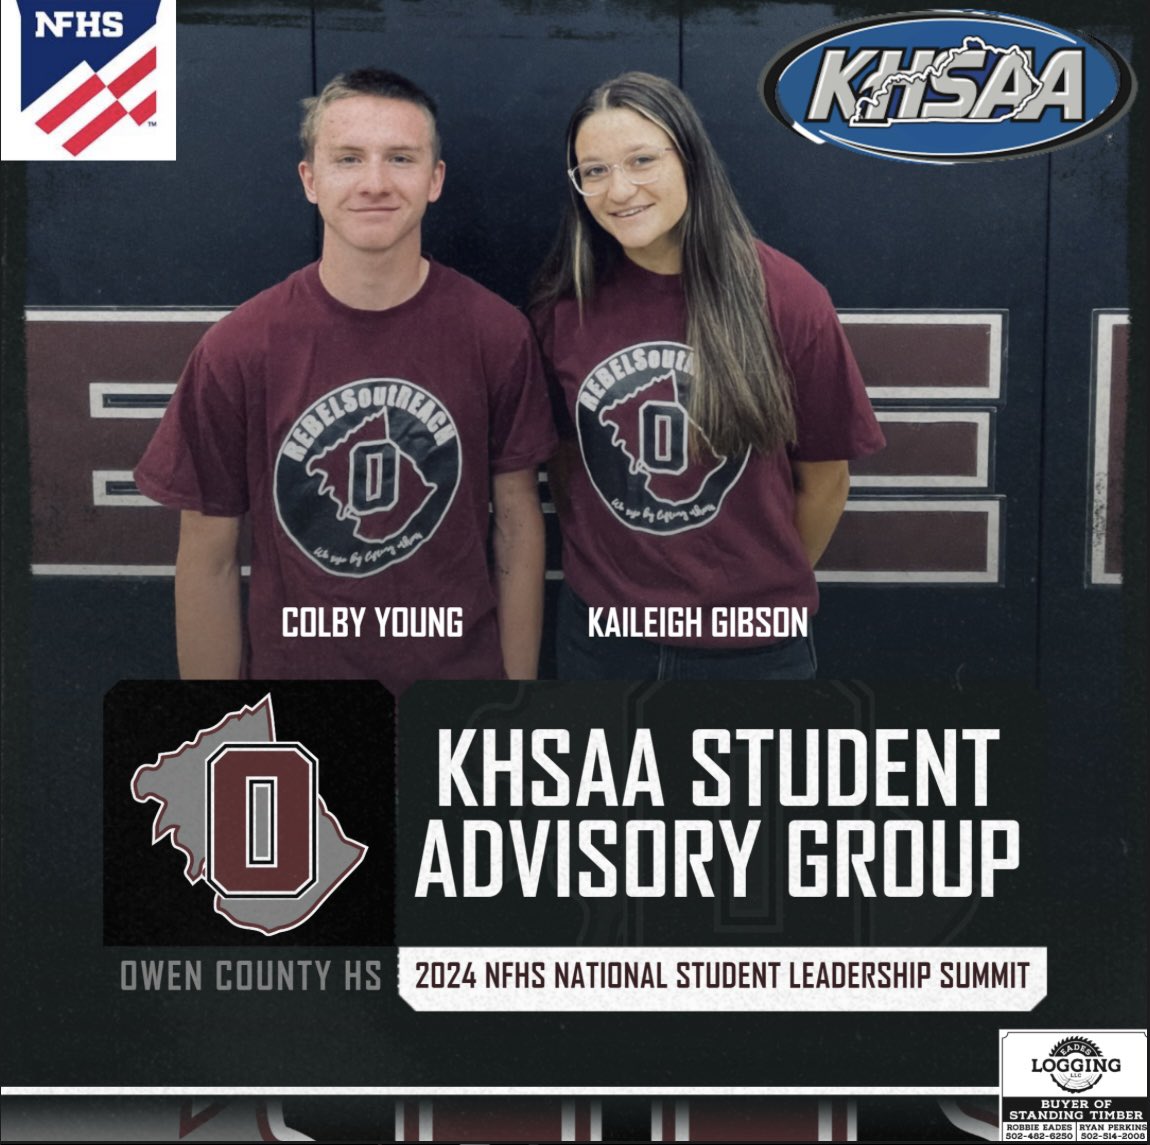 Congrats to Colby Young & Kailiegh Gibson who were selected to the KHSAA Student Advisory Group. 

Only 16 students across KY were selected to serve in this leadership role.  They will be attending the NFHS National Student Leadership Summit this June in Indianapolis. 

#WEareOC